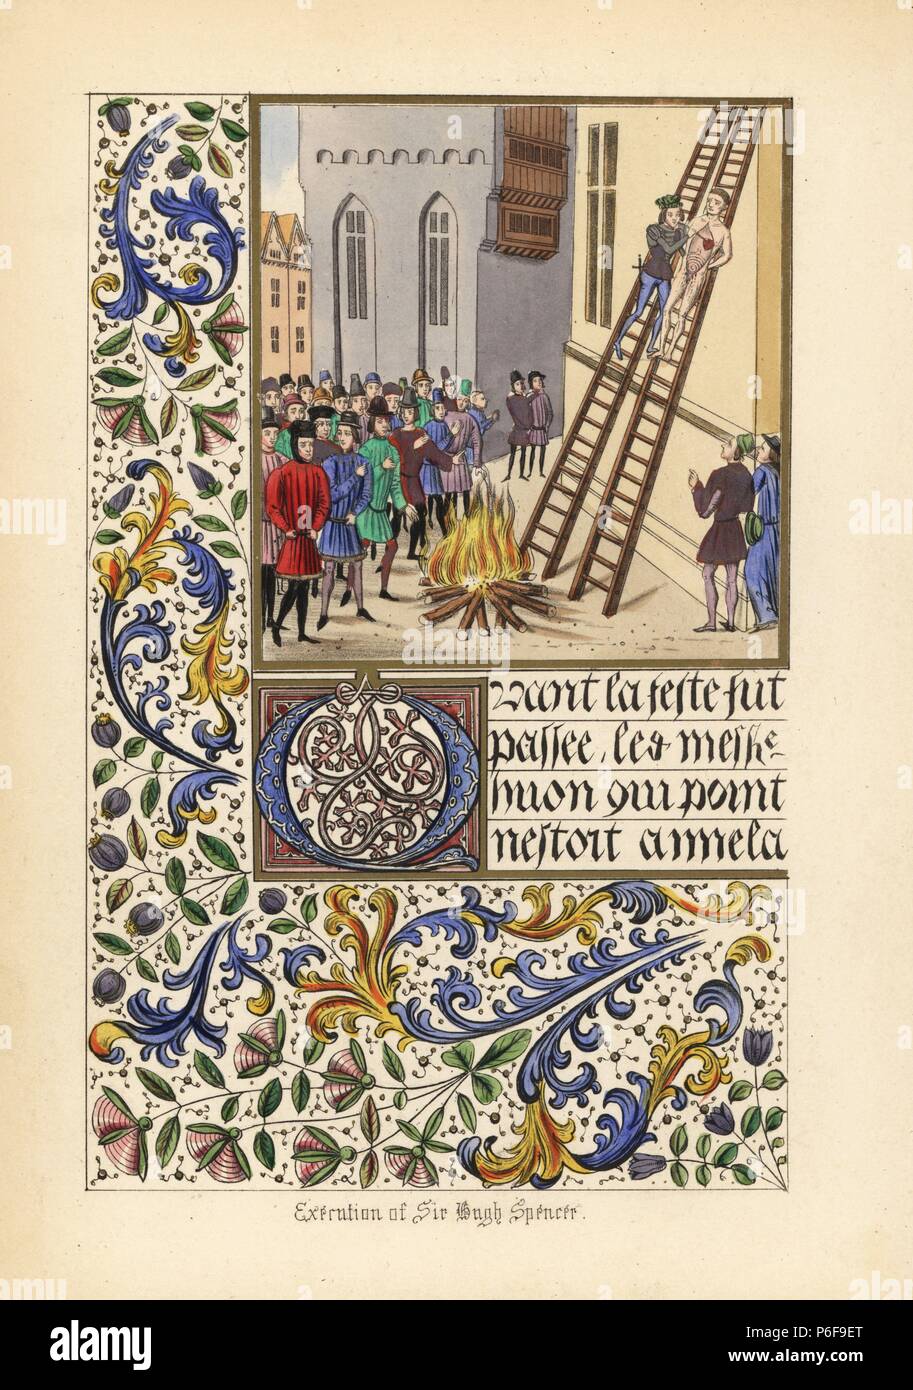 The execution of Sir Hugh Spencer (Despenser) in Hereford, 1326. He was bound on a high scaffold in the marketplace, hanged, castrated, disemboweled, beheaded and quartered. Illuminated panel of foliage and flowers. Handcoloured lithograph after an illuminated manuscript from Sir John Froissart's 'Chronicles of England, France, Spain and the Adjoining Countries, from the Latter Part of the Reign of Edward II to the Coronation of Henry IV,' George Routledge, London, 1868. Stock Photo